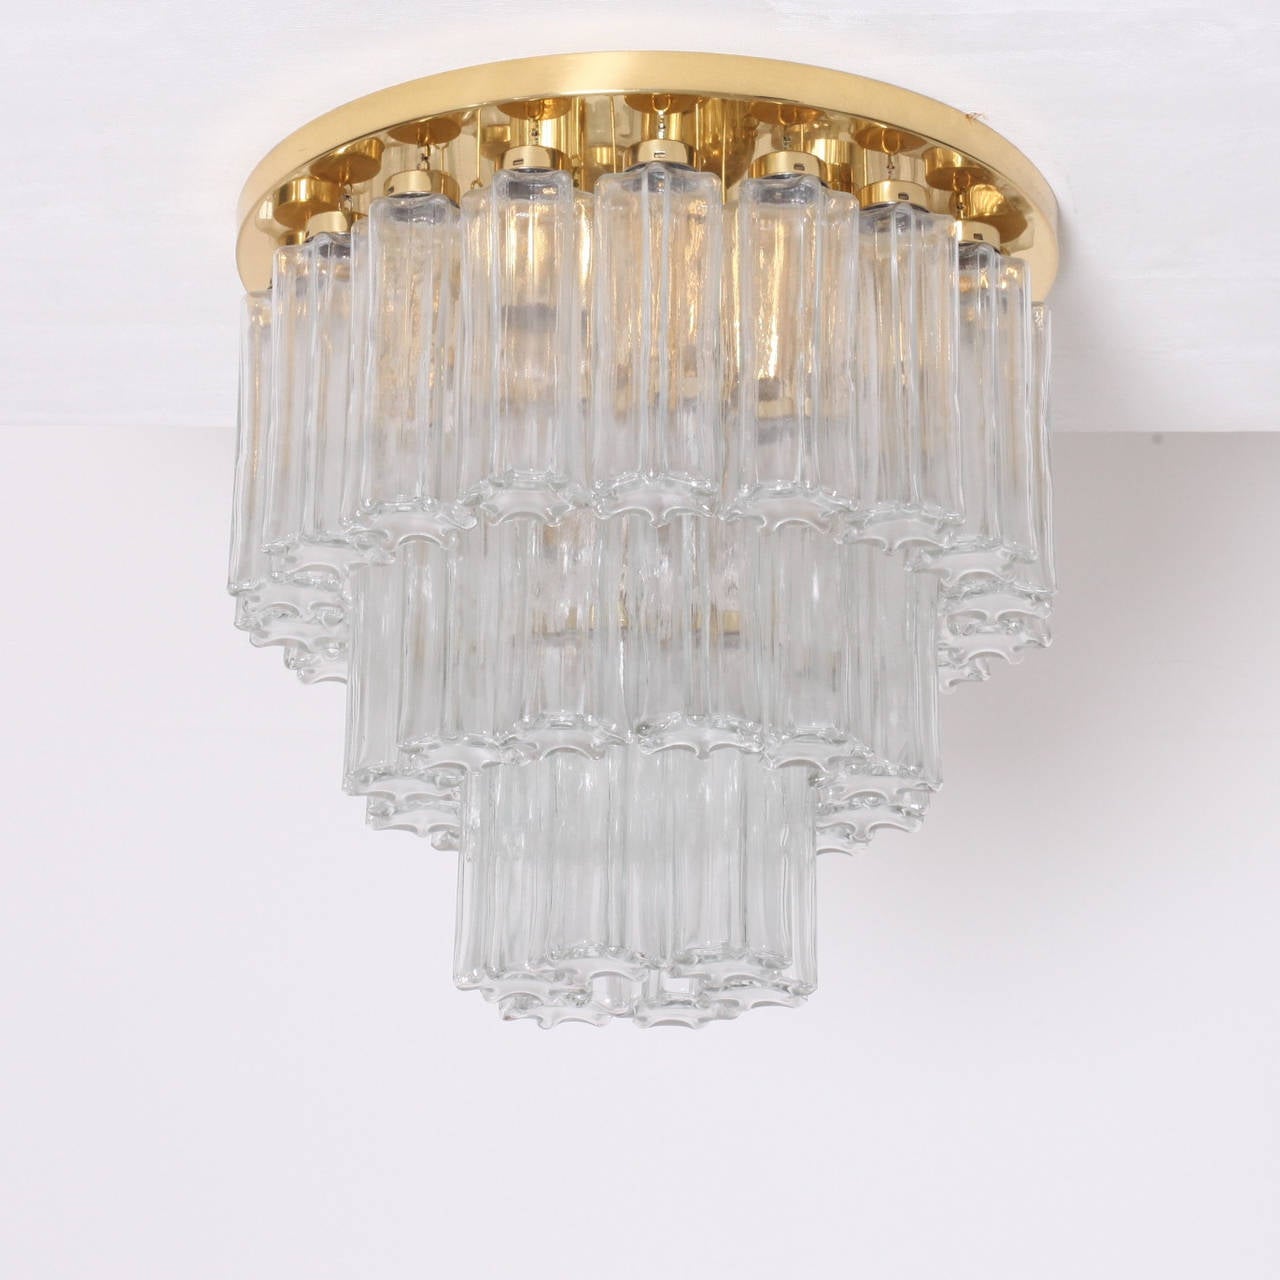 Rare 3-tier flush mount or chandelier with handblown glass pieces on a brass base. This lamp is a high quality production of the 1960s from Glashütte Limburg. 3 2-tier flush mounts from the same series and fitting wall lamps are also listed. The